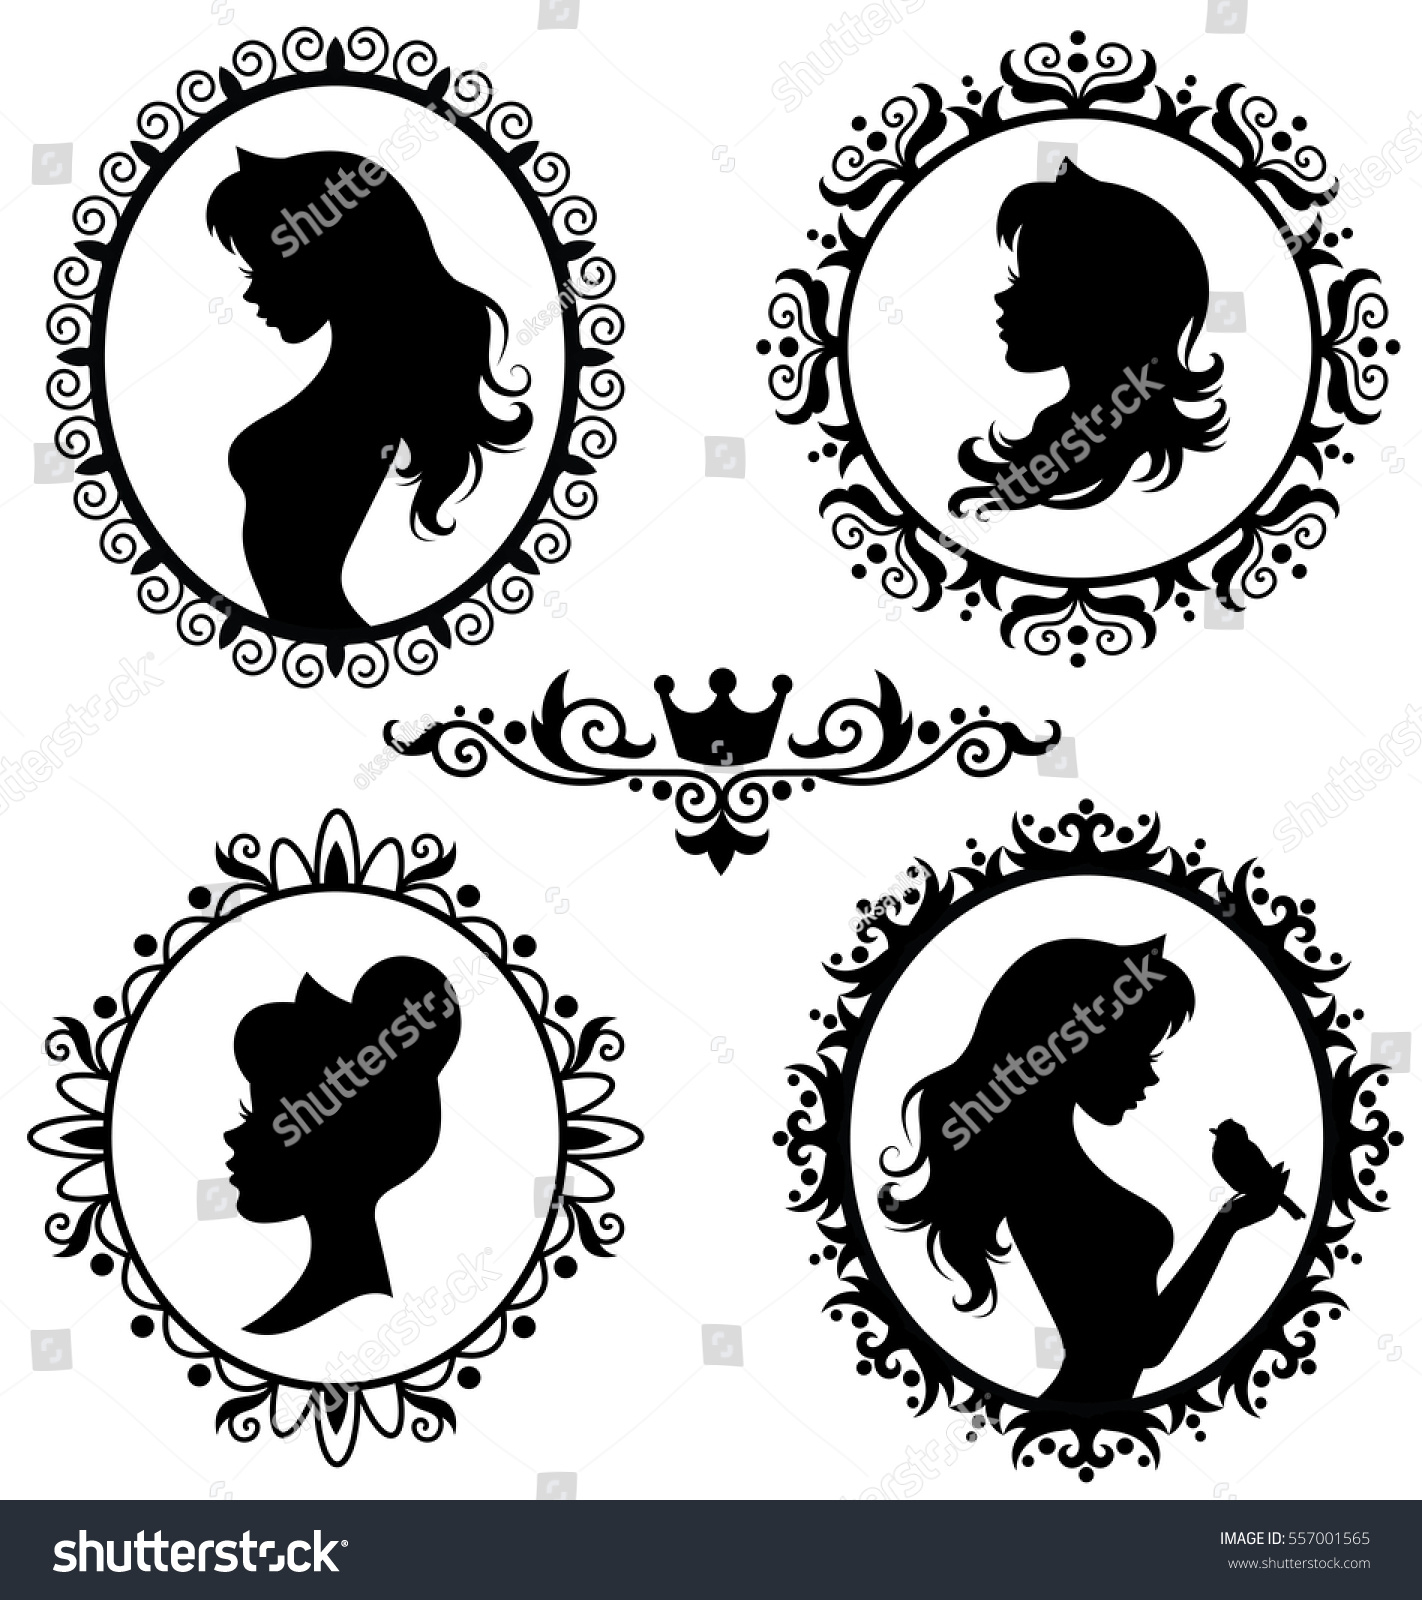 Set Silhouettes Princess Isolated On White Stock Vector Royalty Free 557001565 Shutterstock 